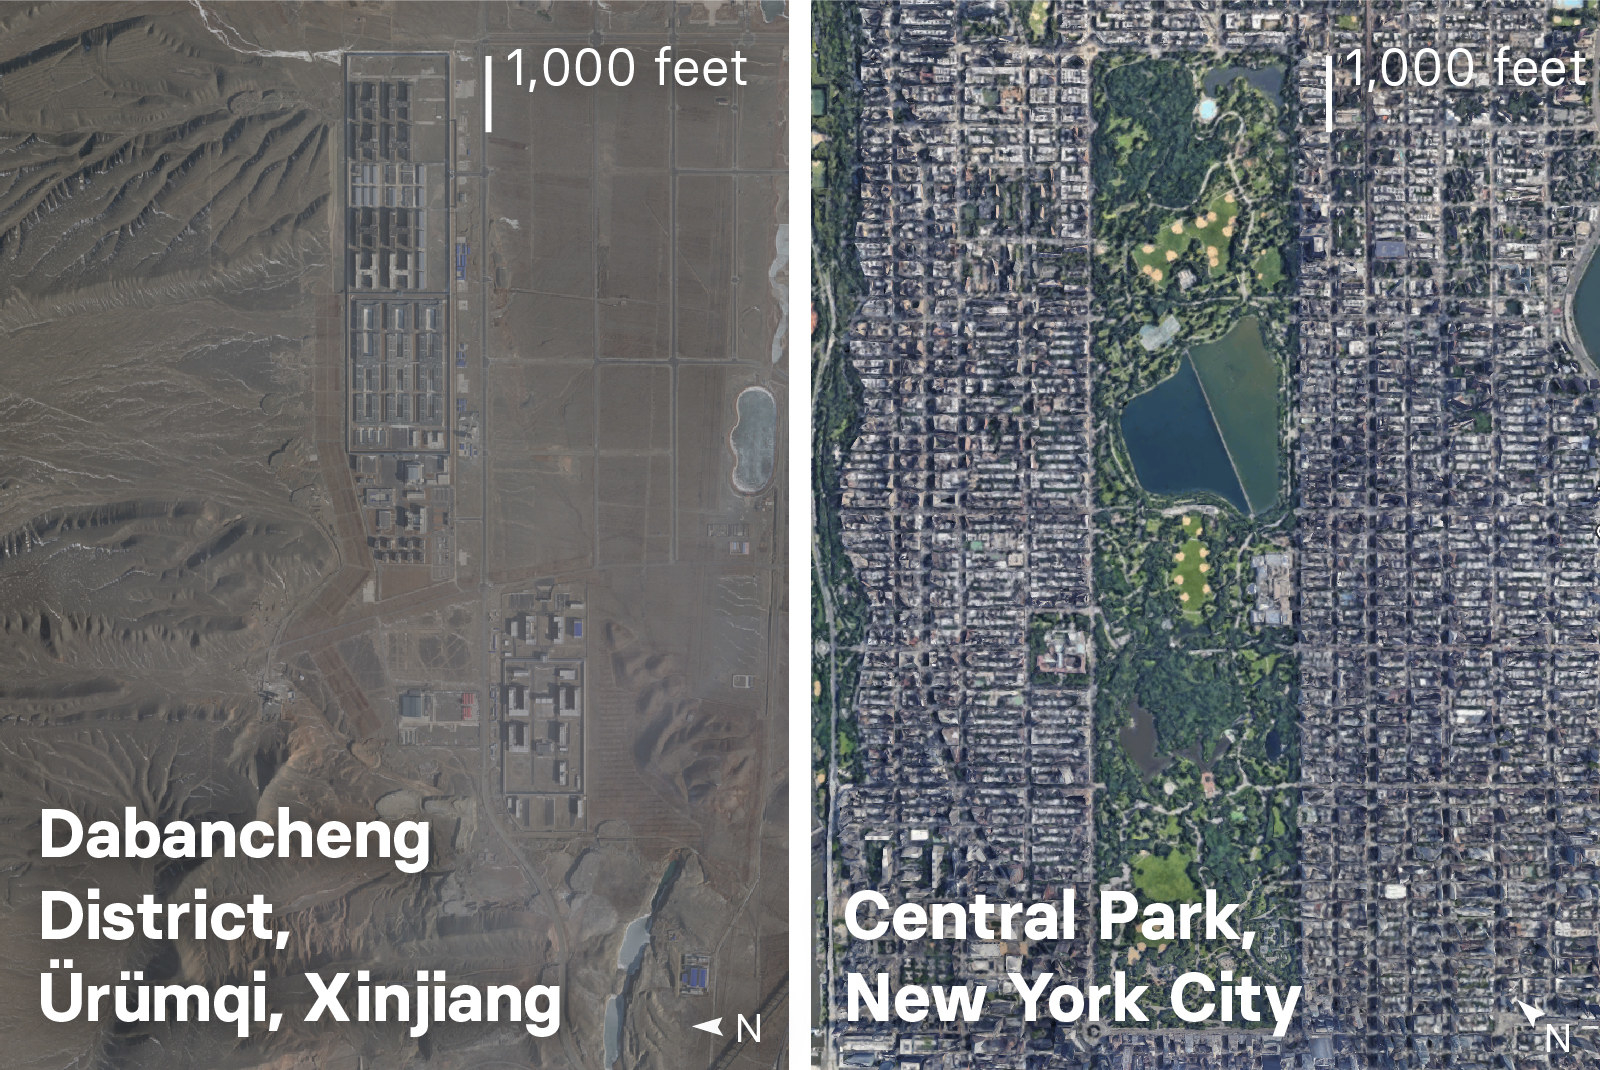 One of the facilities in Dabancheng appears to be about half the size of Central Park in New York City